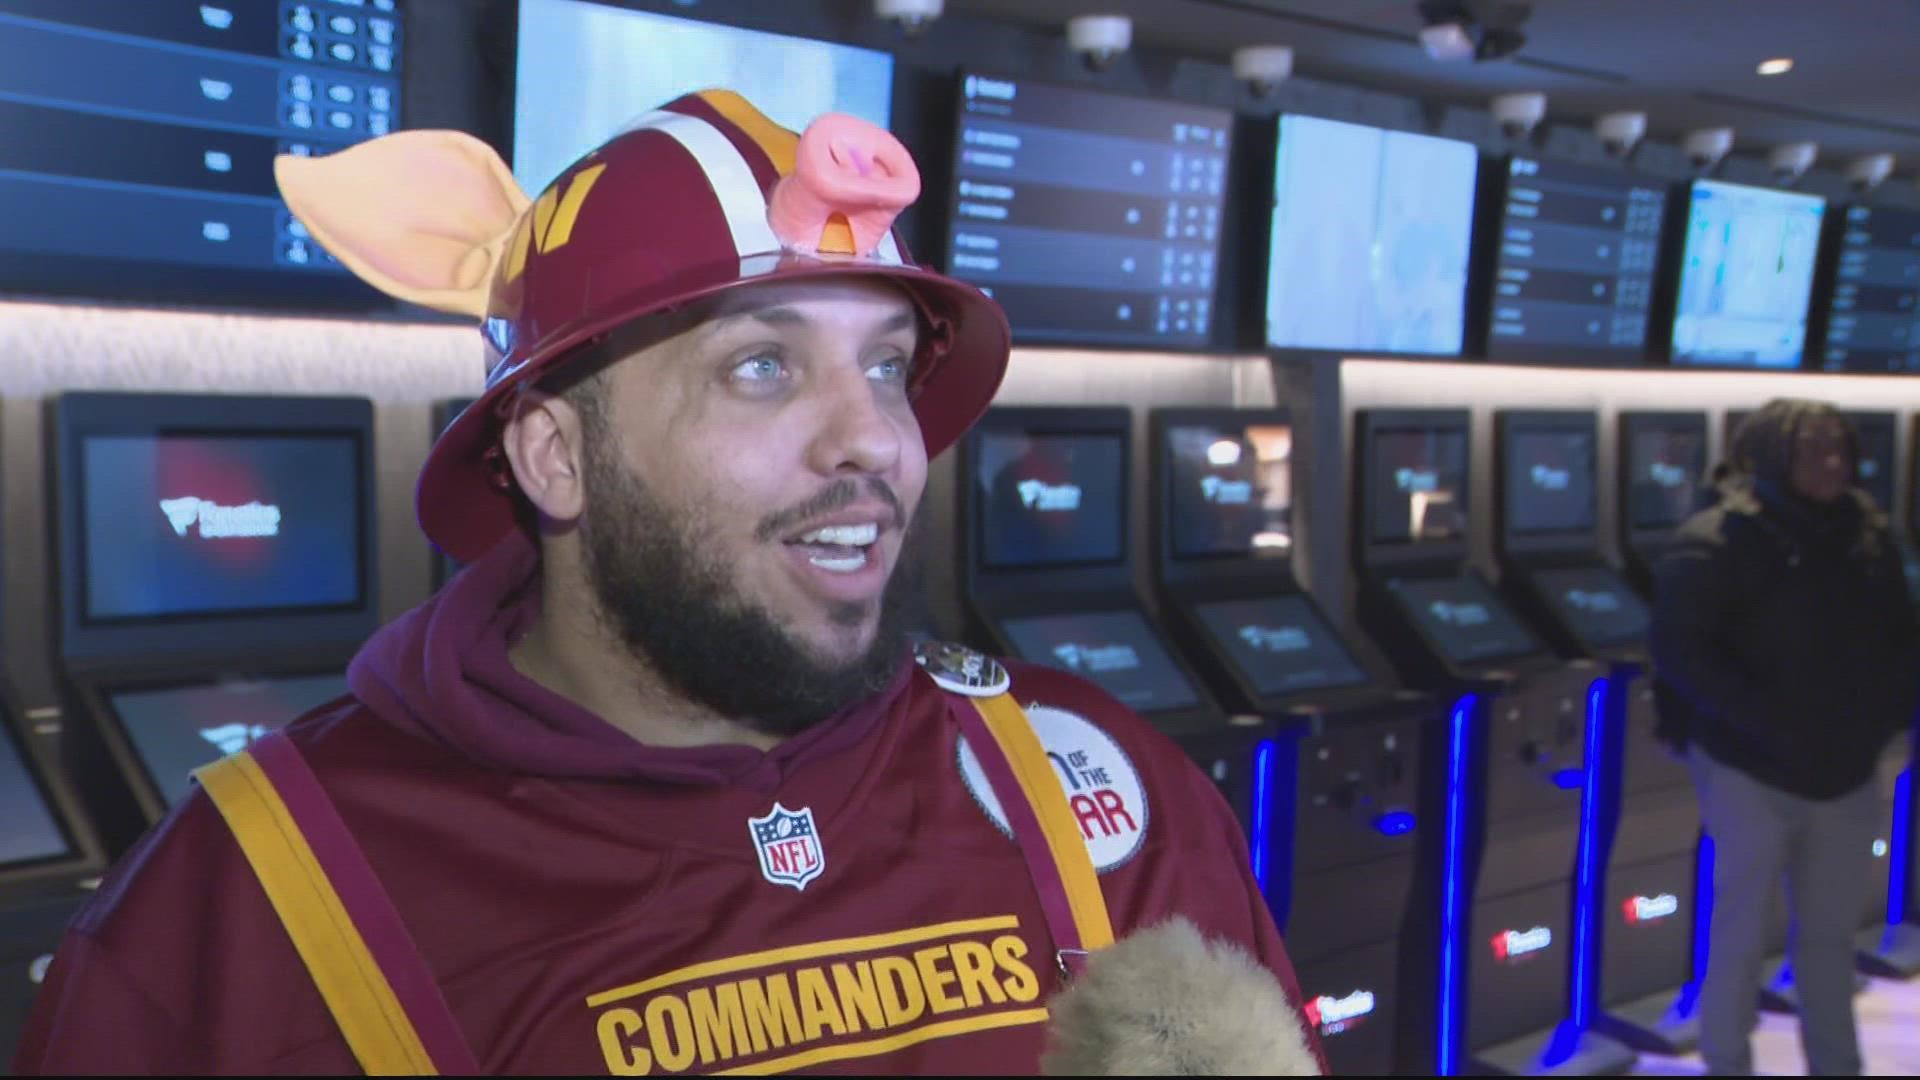 The first ever sportsbook in an NFL stadium opened at FedEx Field, and is now taking bets.